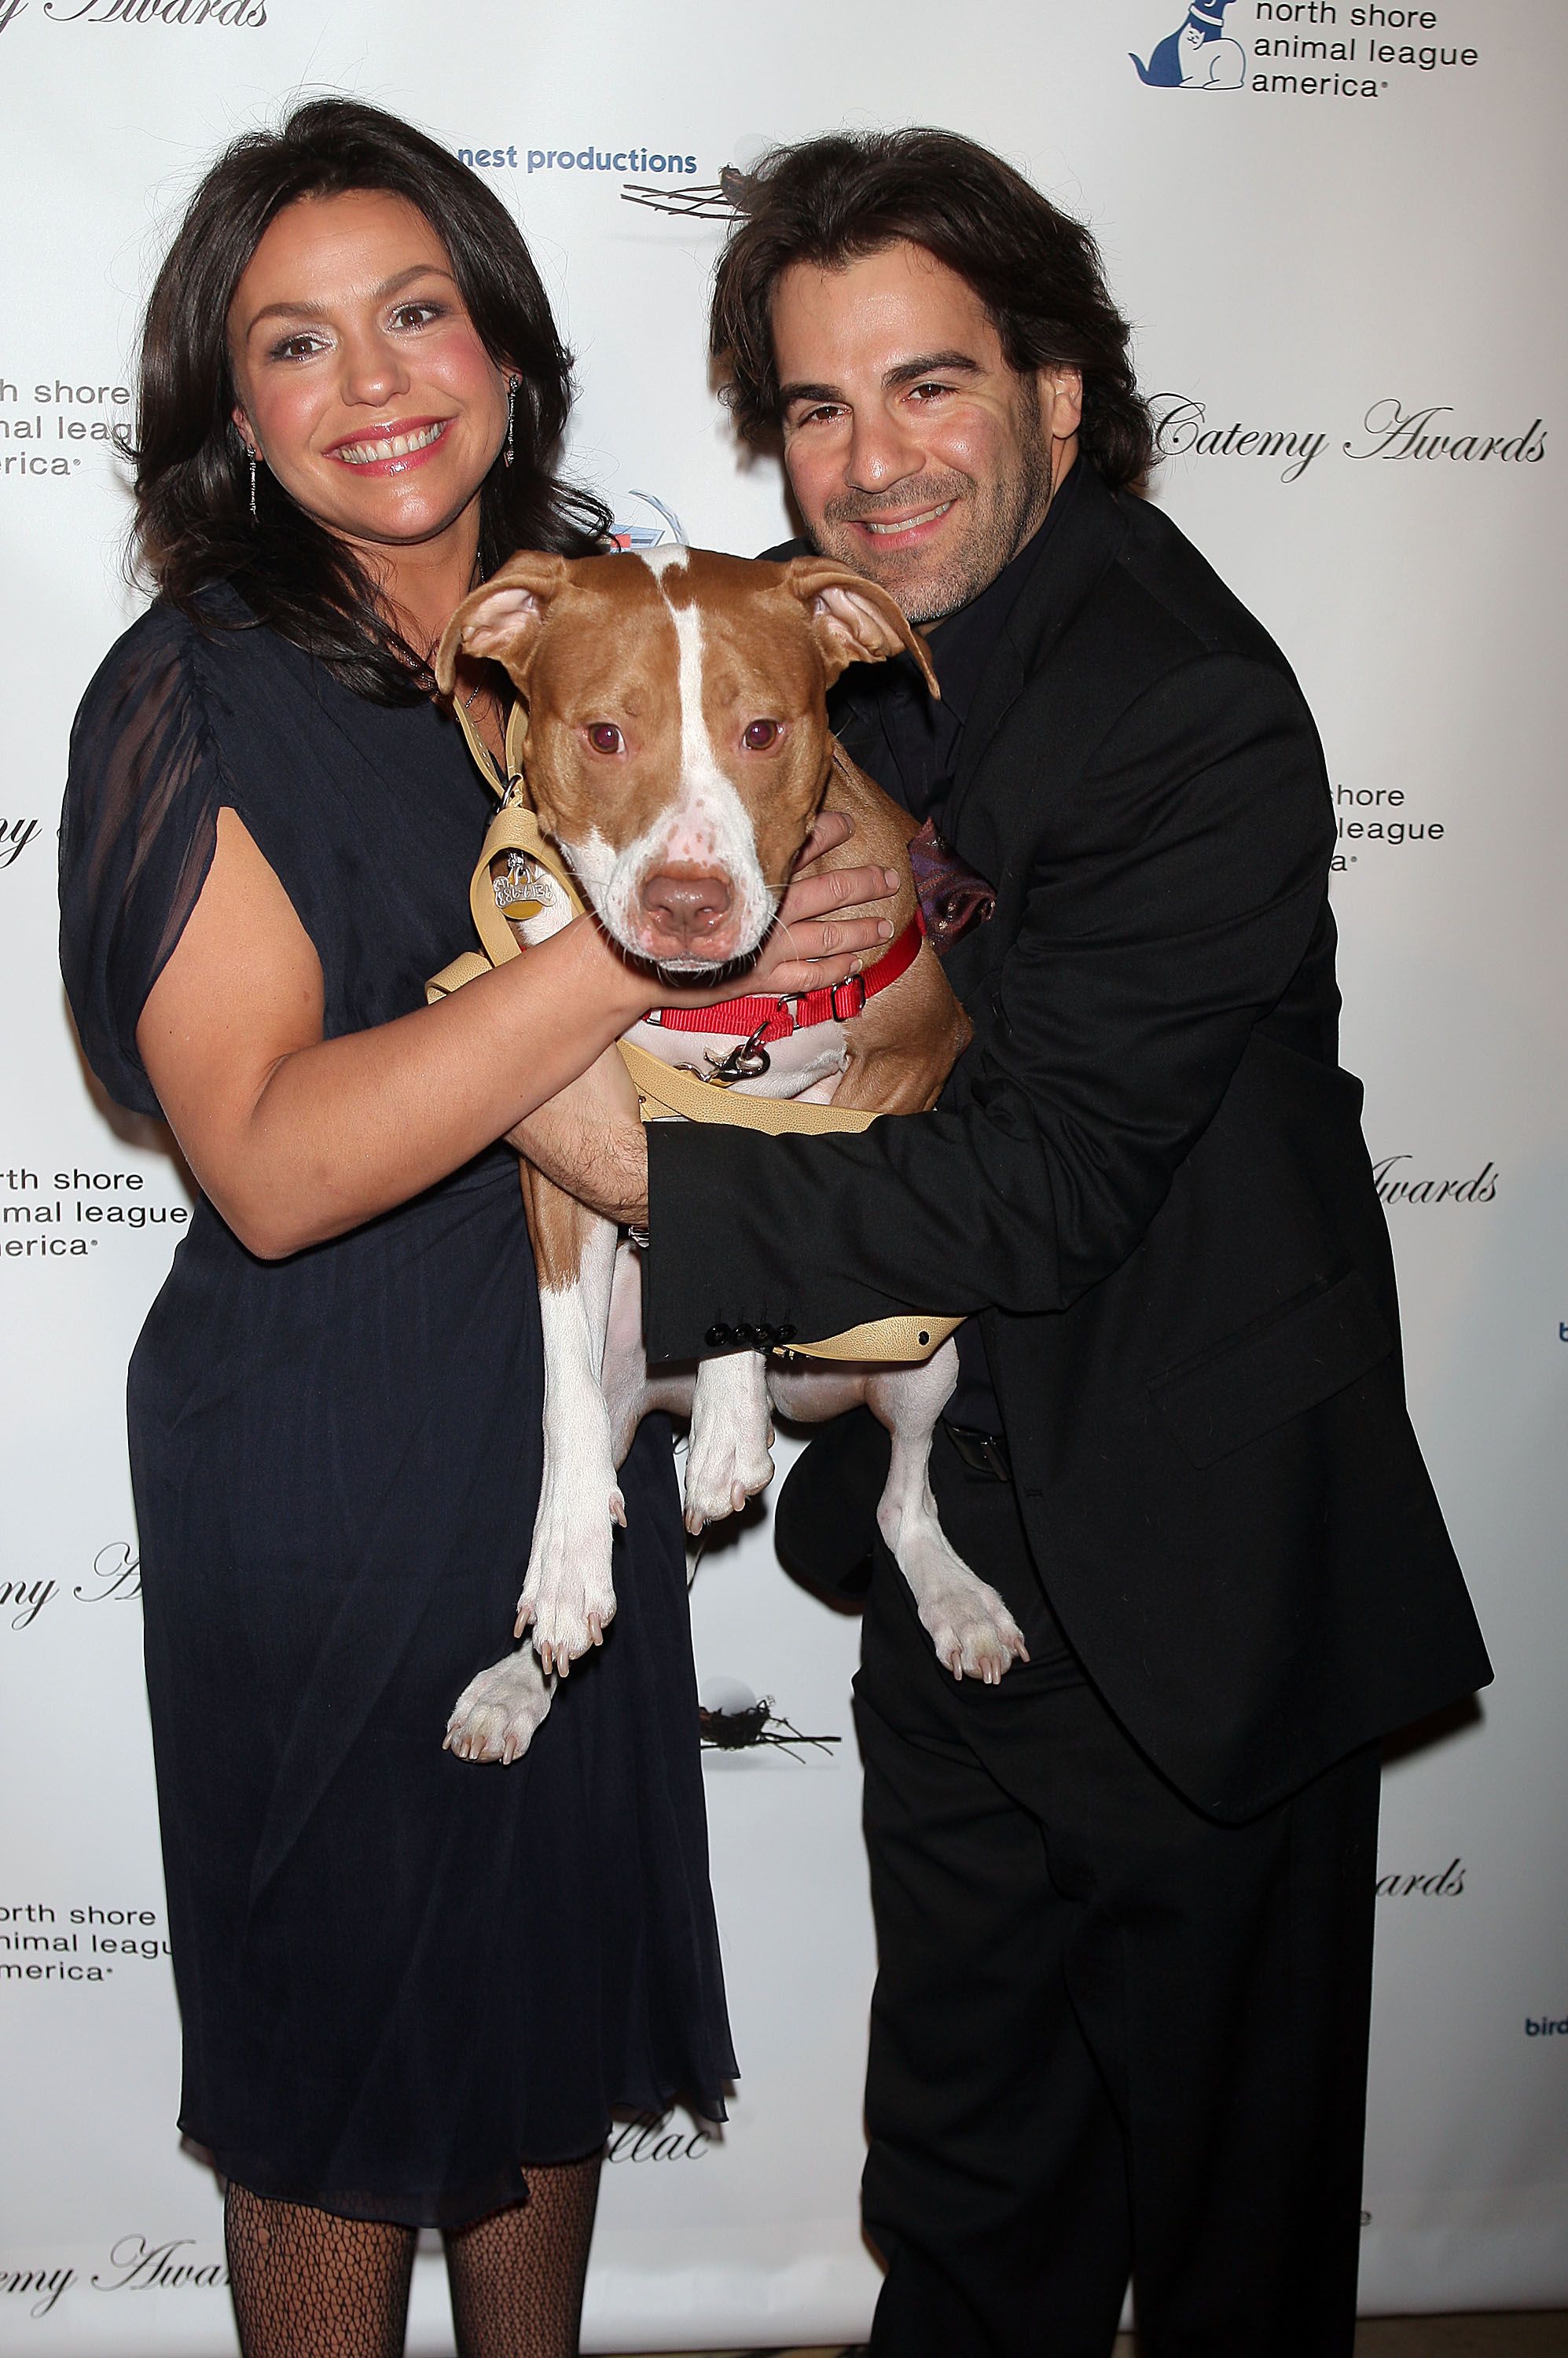 y Rachael Ray and John Cusimano and their dog Isaboo at the North Shore Animal League America's 2nd annual DogCatemy Awards in 2007 in New York | Source: Getty Images